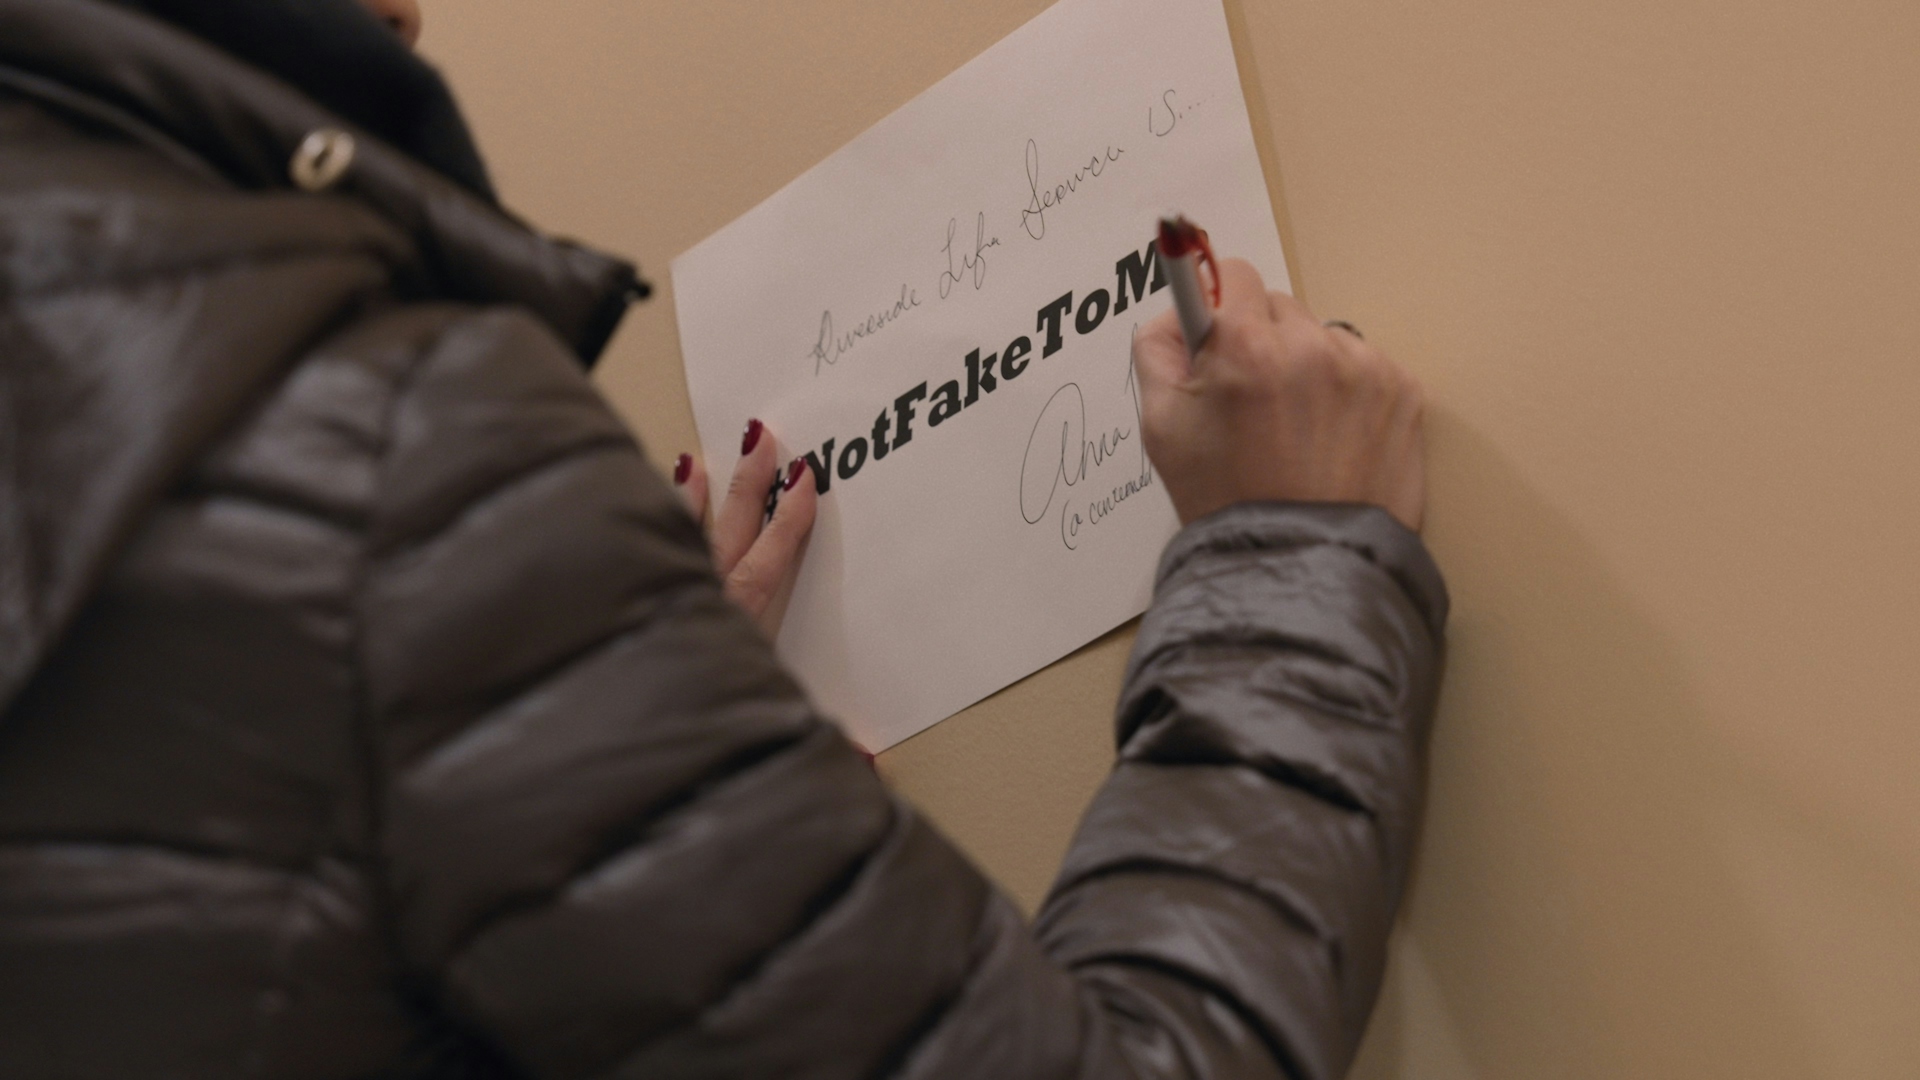 A woman signing a piece of paper with "Not Fake To Me" written on it